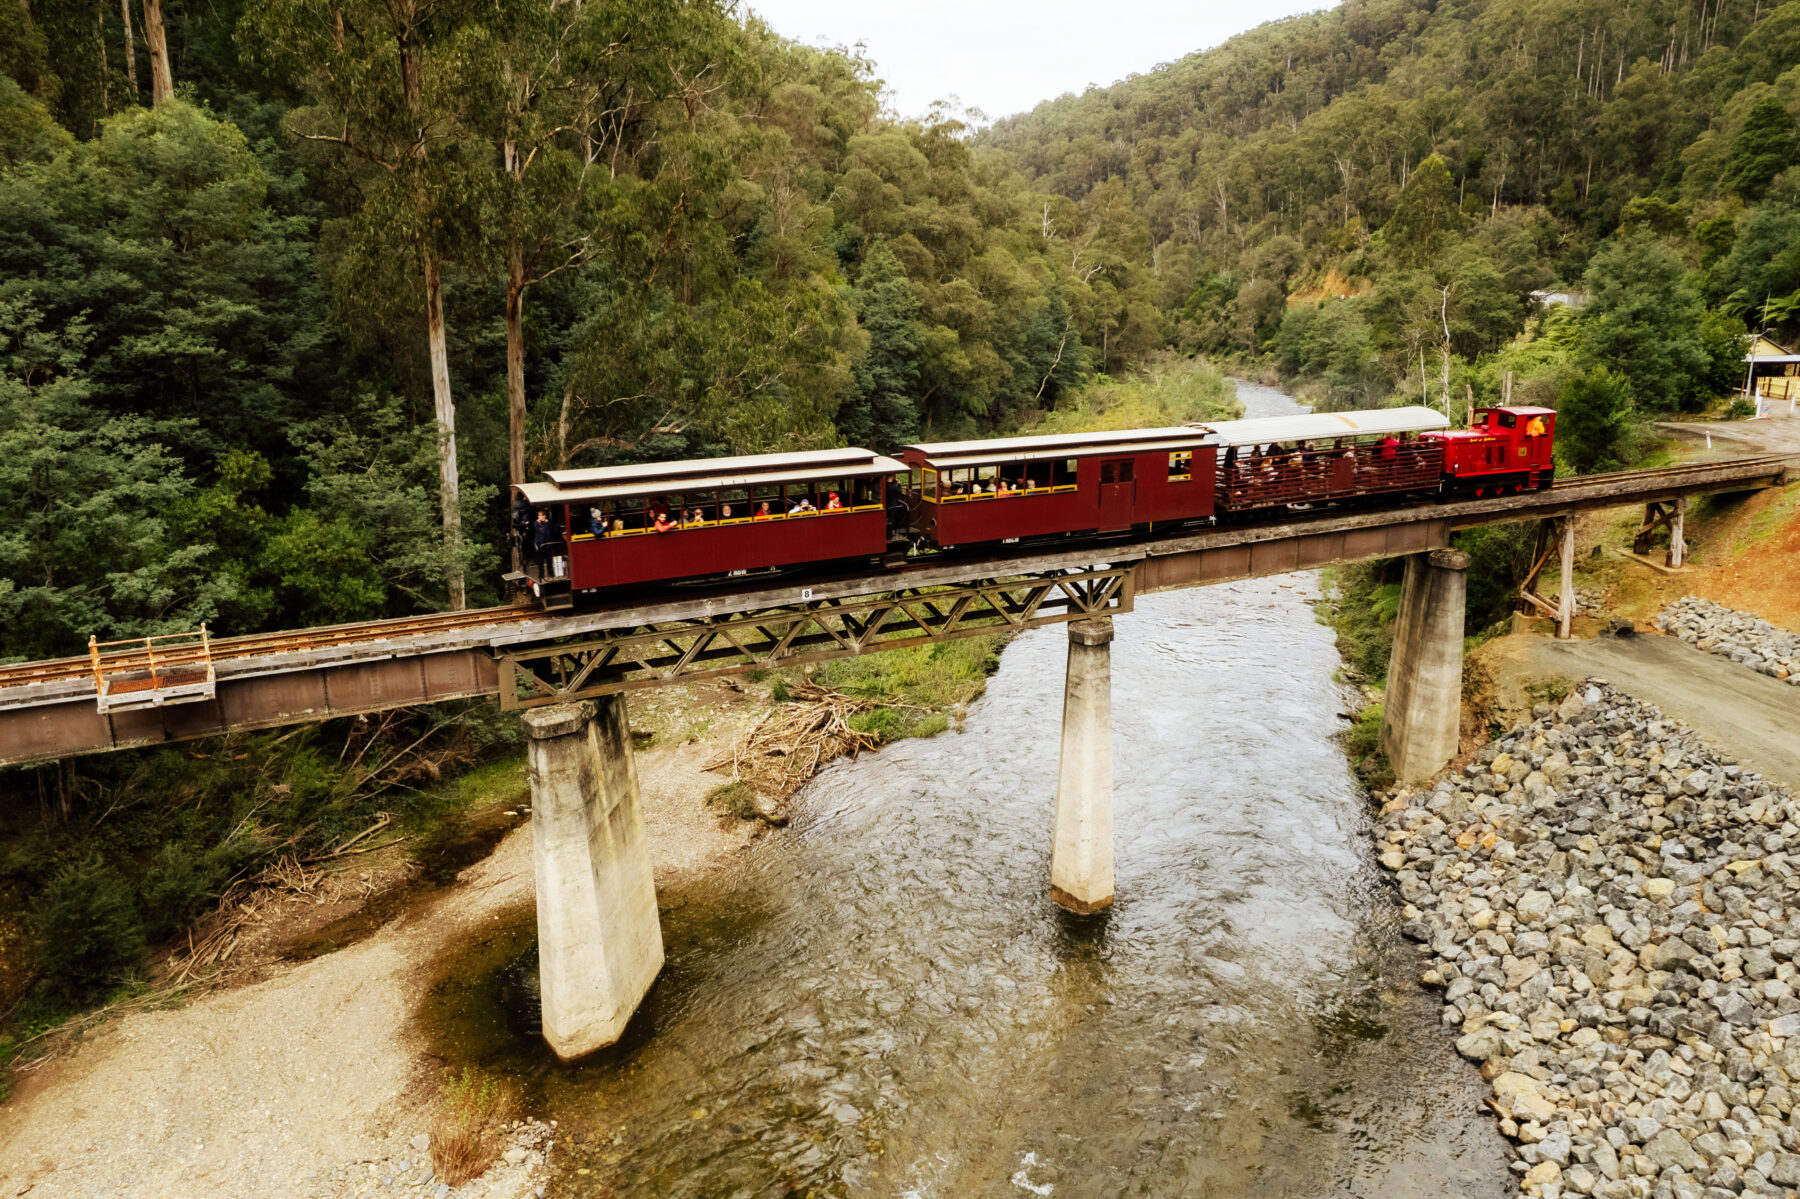 The Walhalla Goldfields Railway which runs between the Walhalla and Thomson River stations